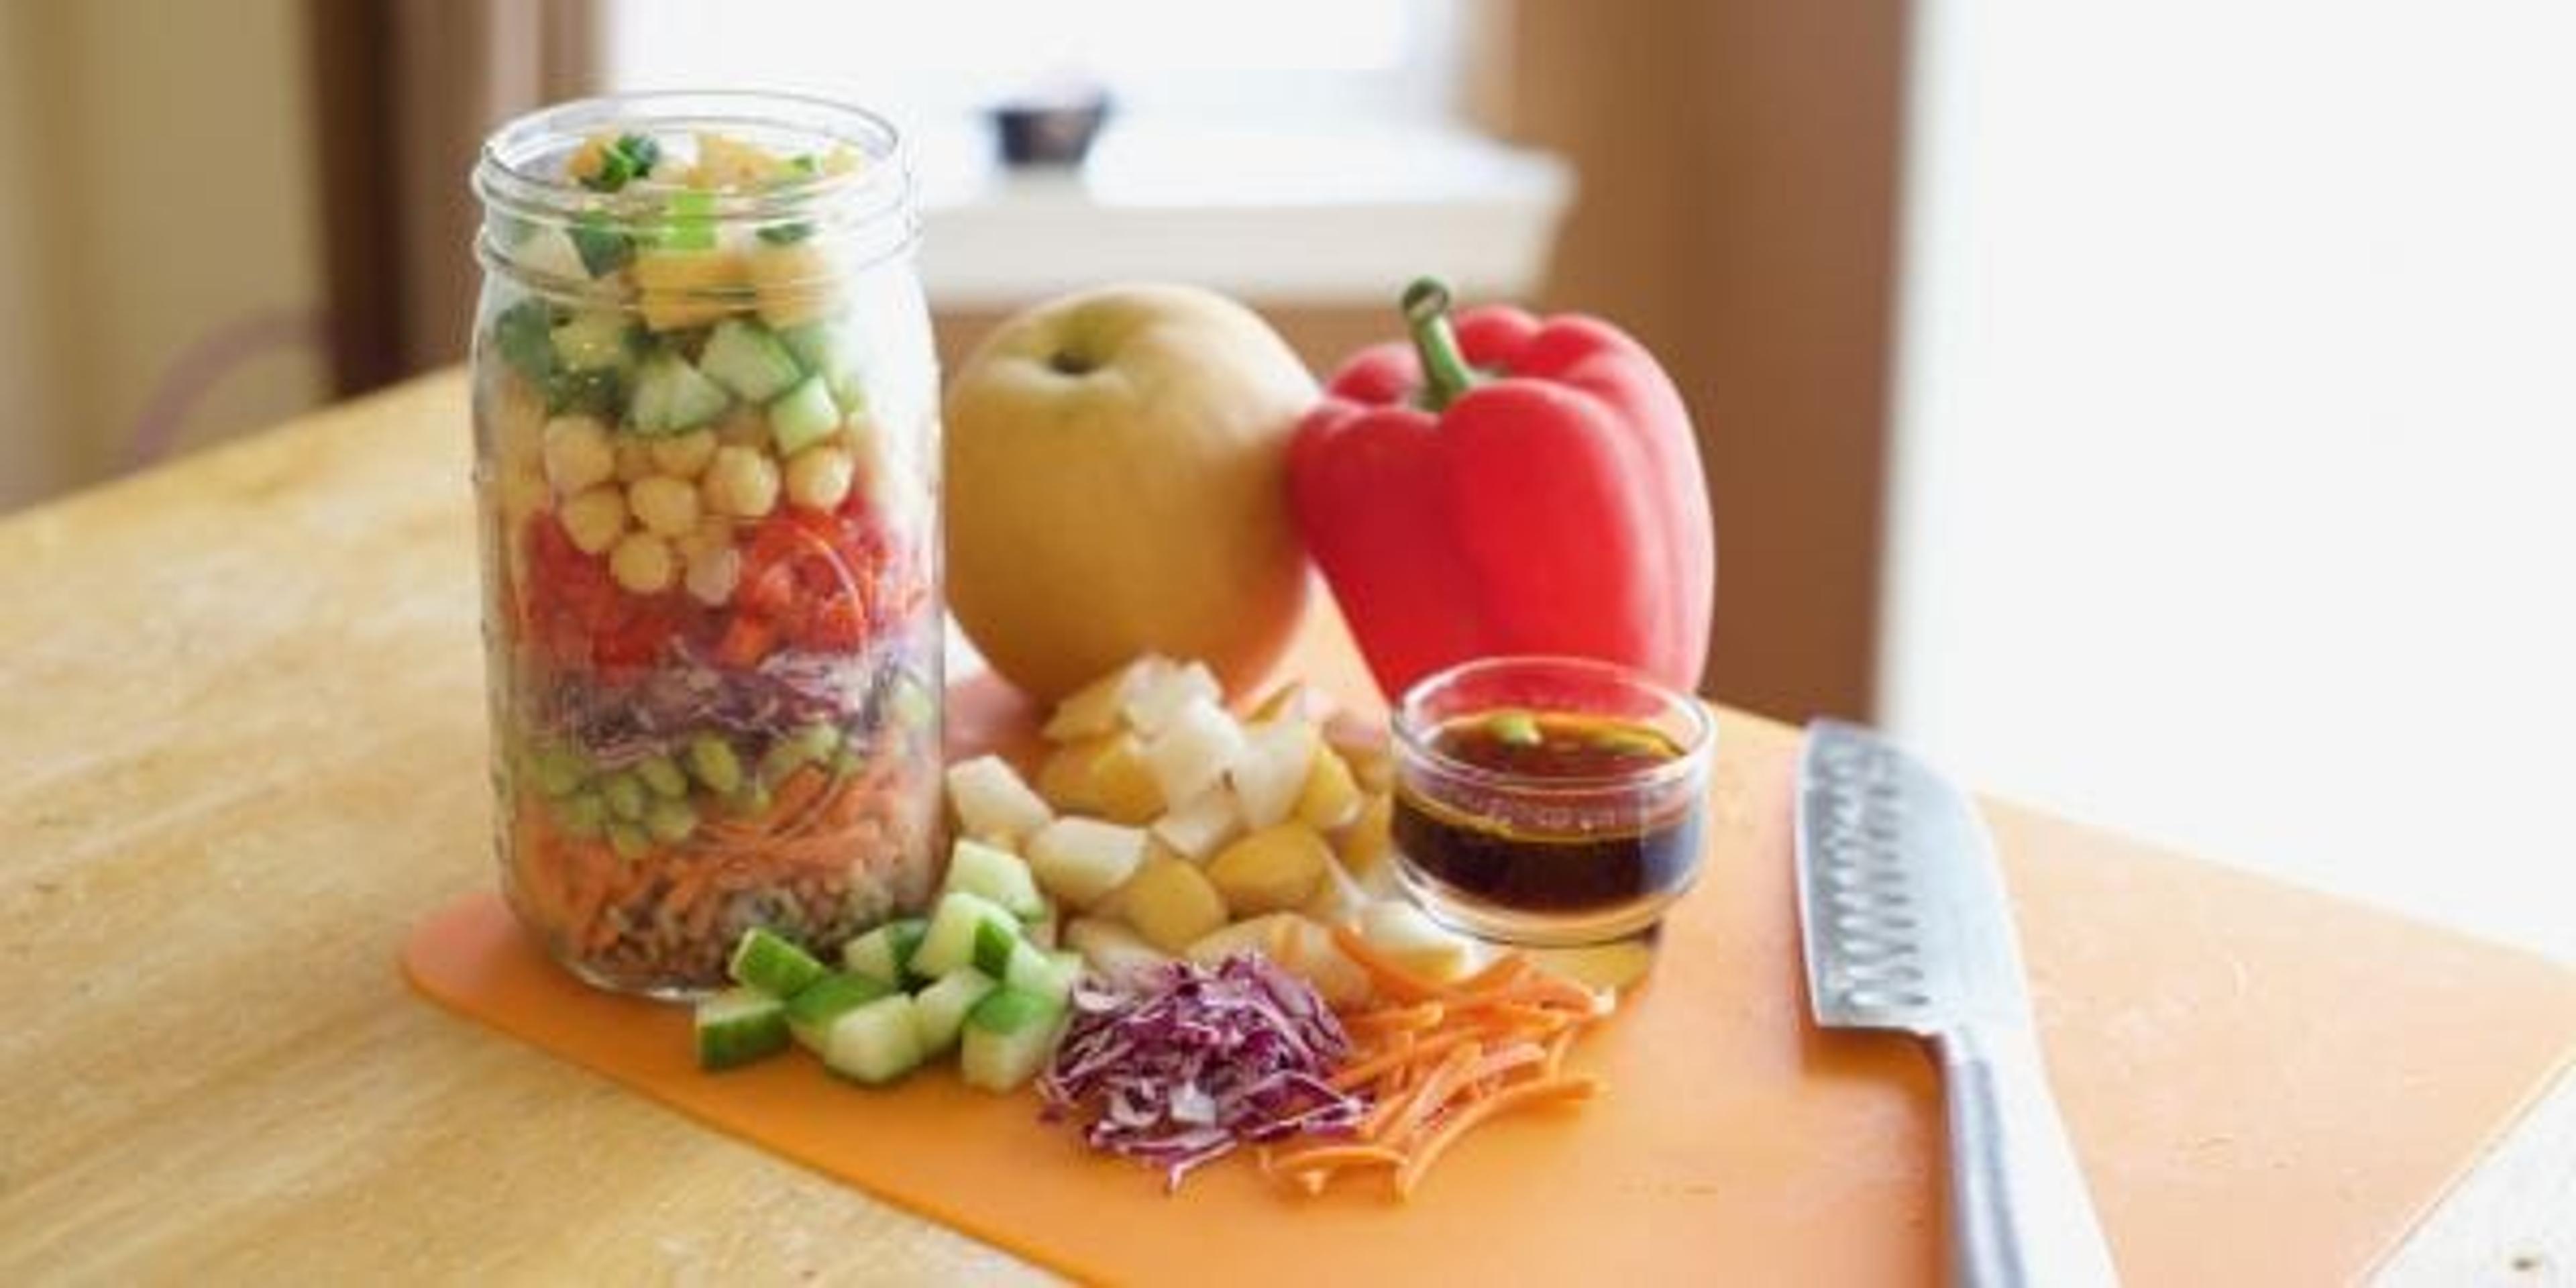 Mason jar salad with vegetables and dressing